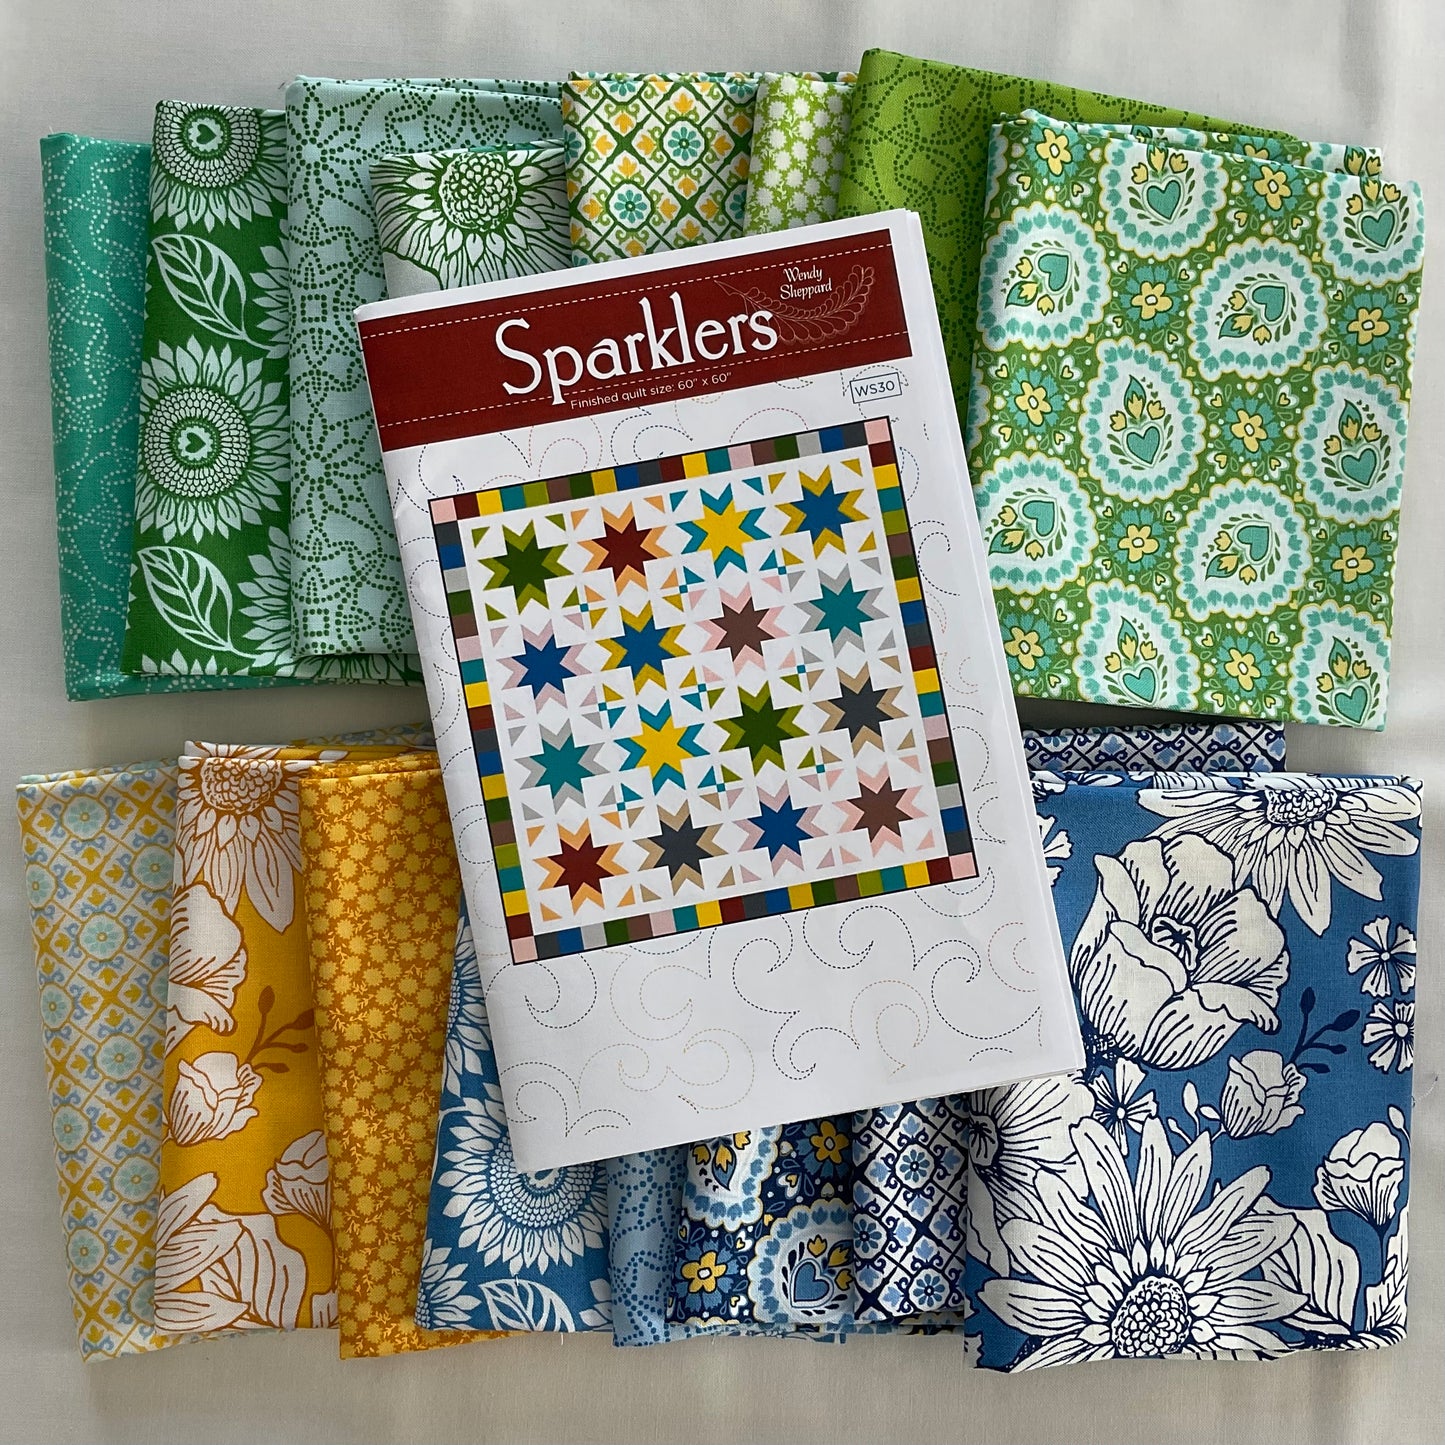 Sparklers Quilt Kit featuring Sunflowers in my Heart by Kate Spain